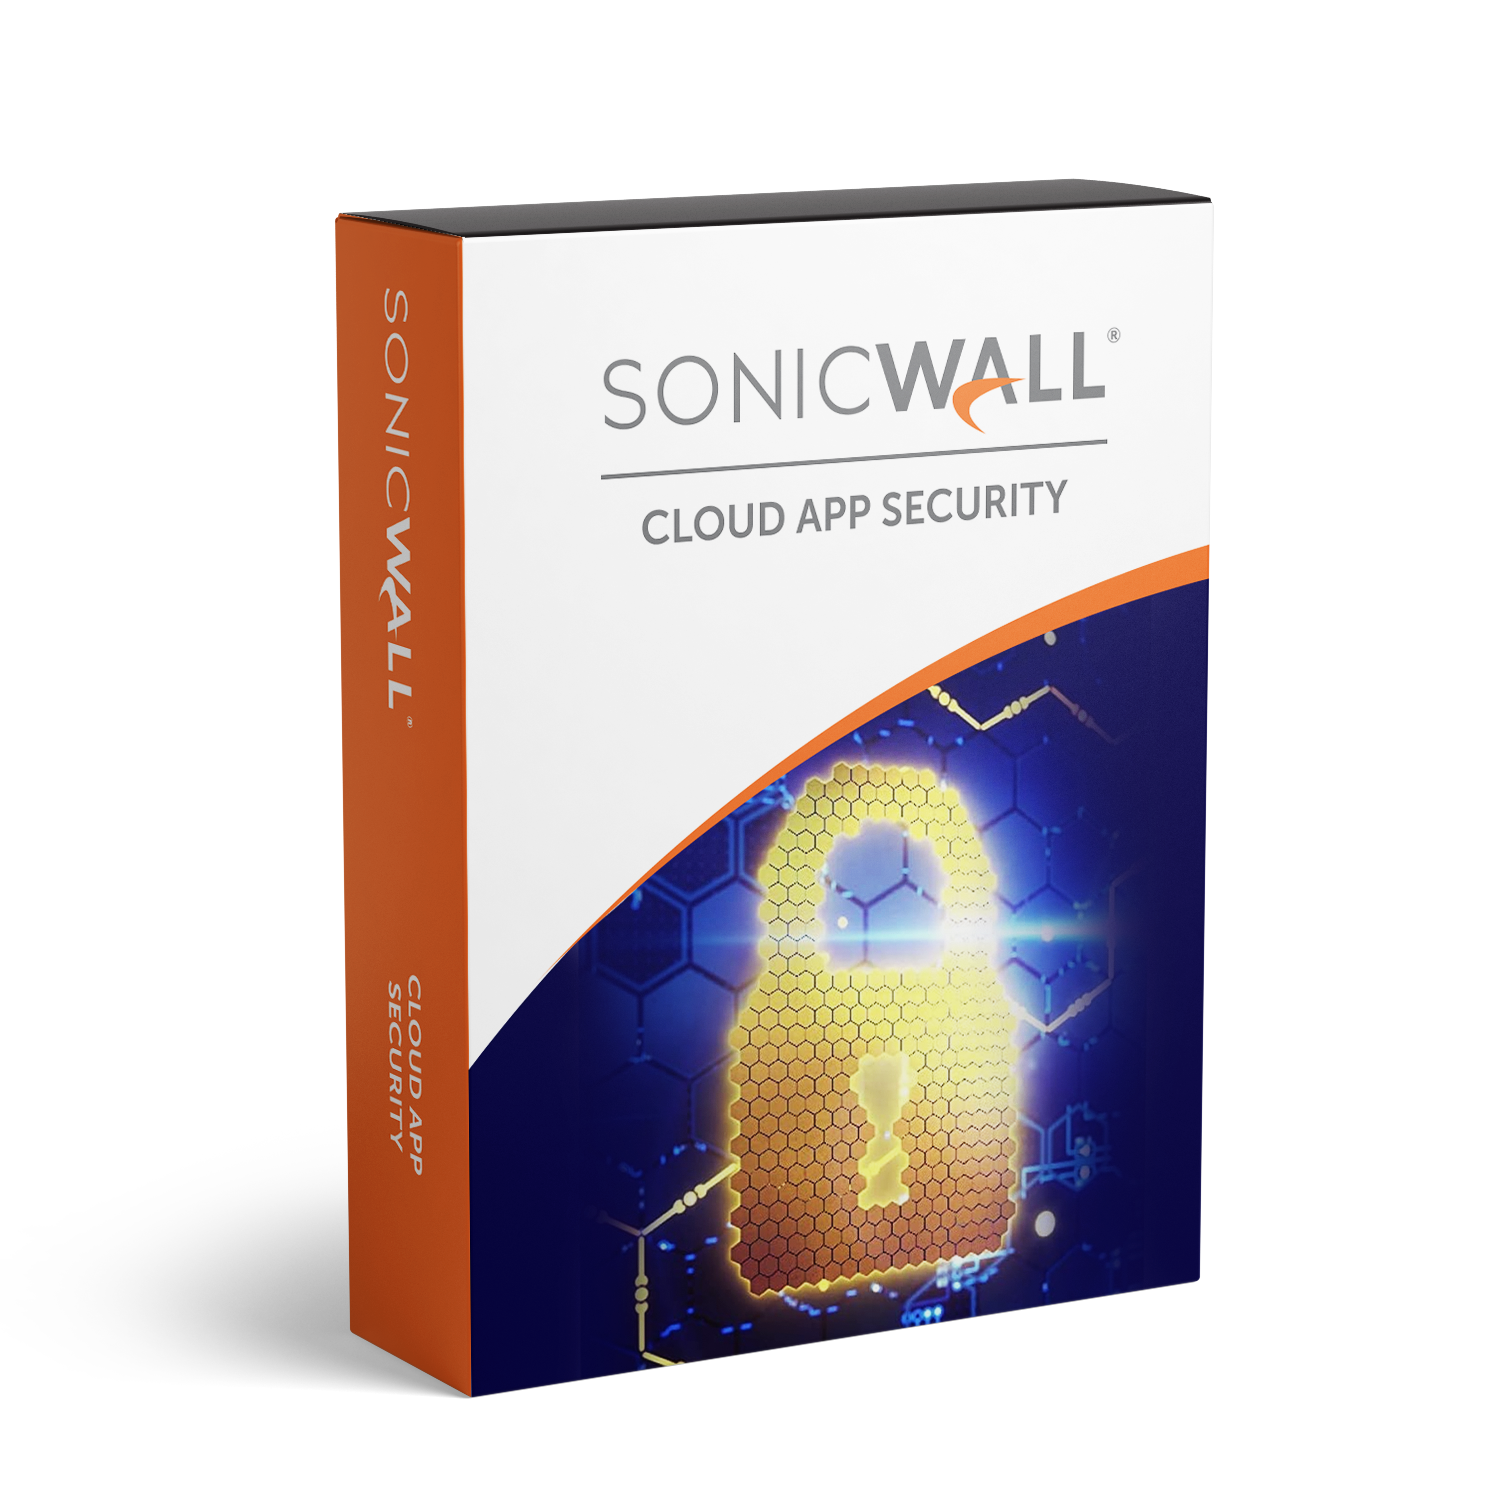 SonicWall Cloud App Security